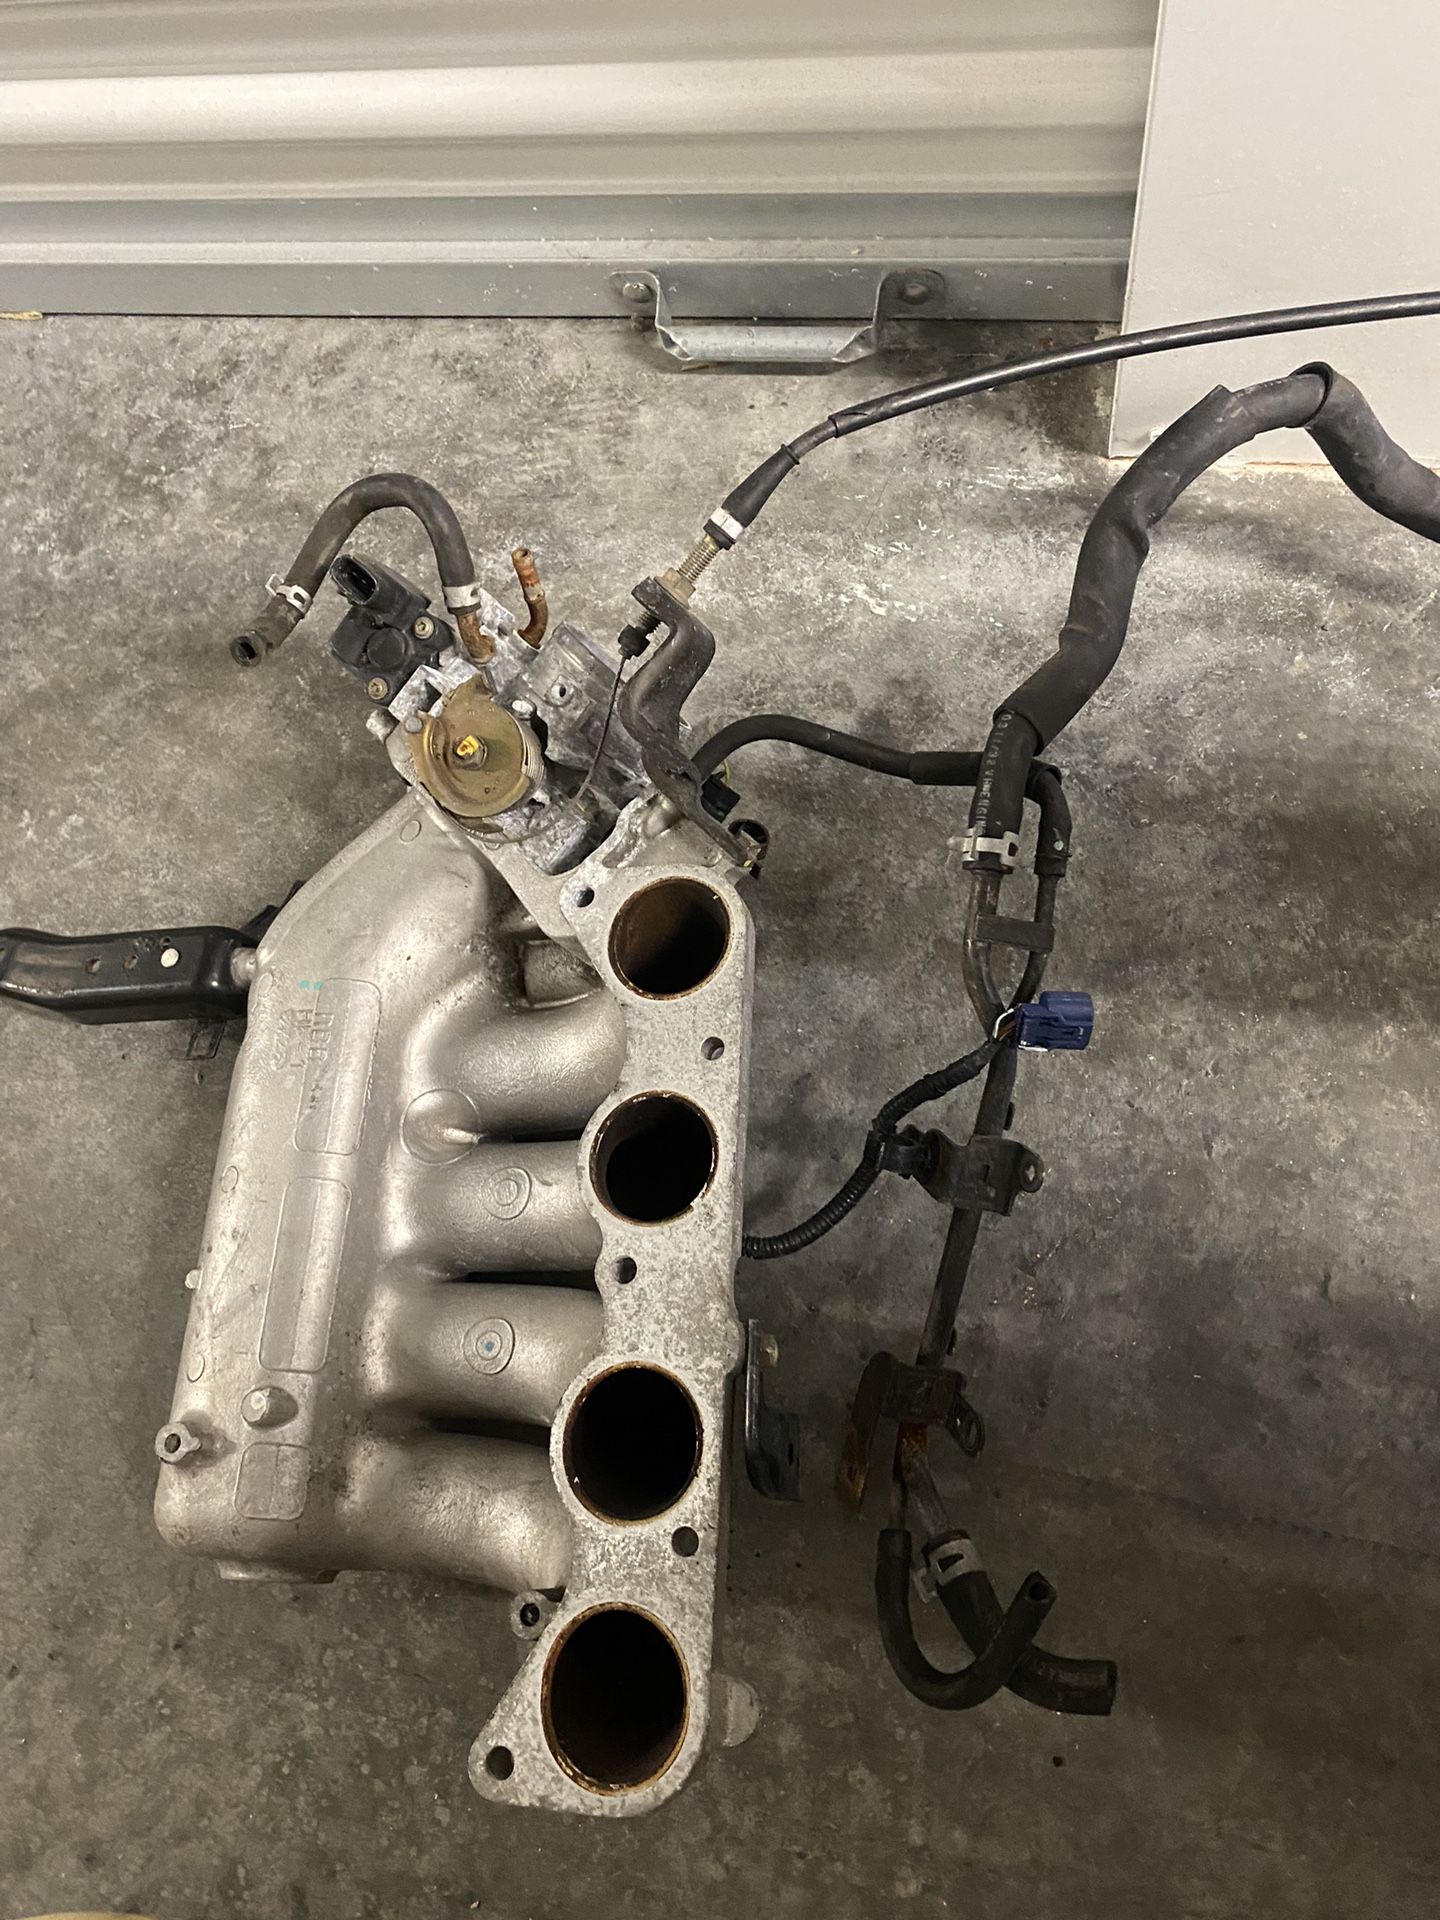 06-08 UPPER INTAKE MANIFOLD RBB HF-1  Honda Acura K24 K24A Not completely sure about description please be informed and ask any questions 